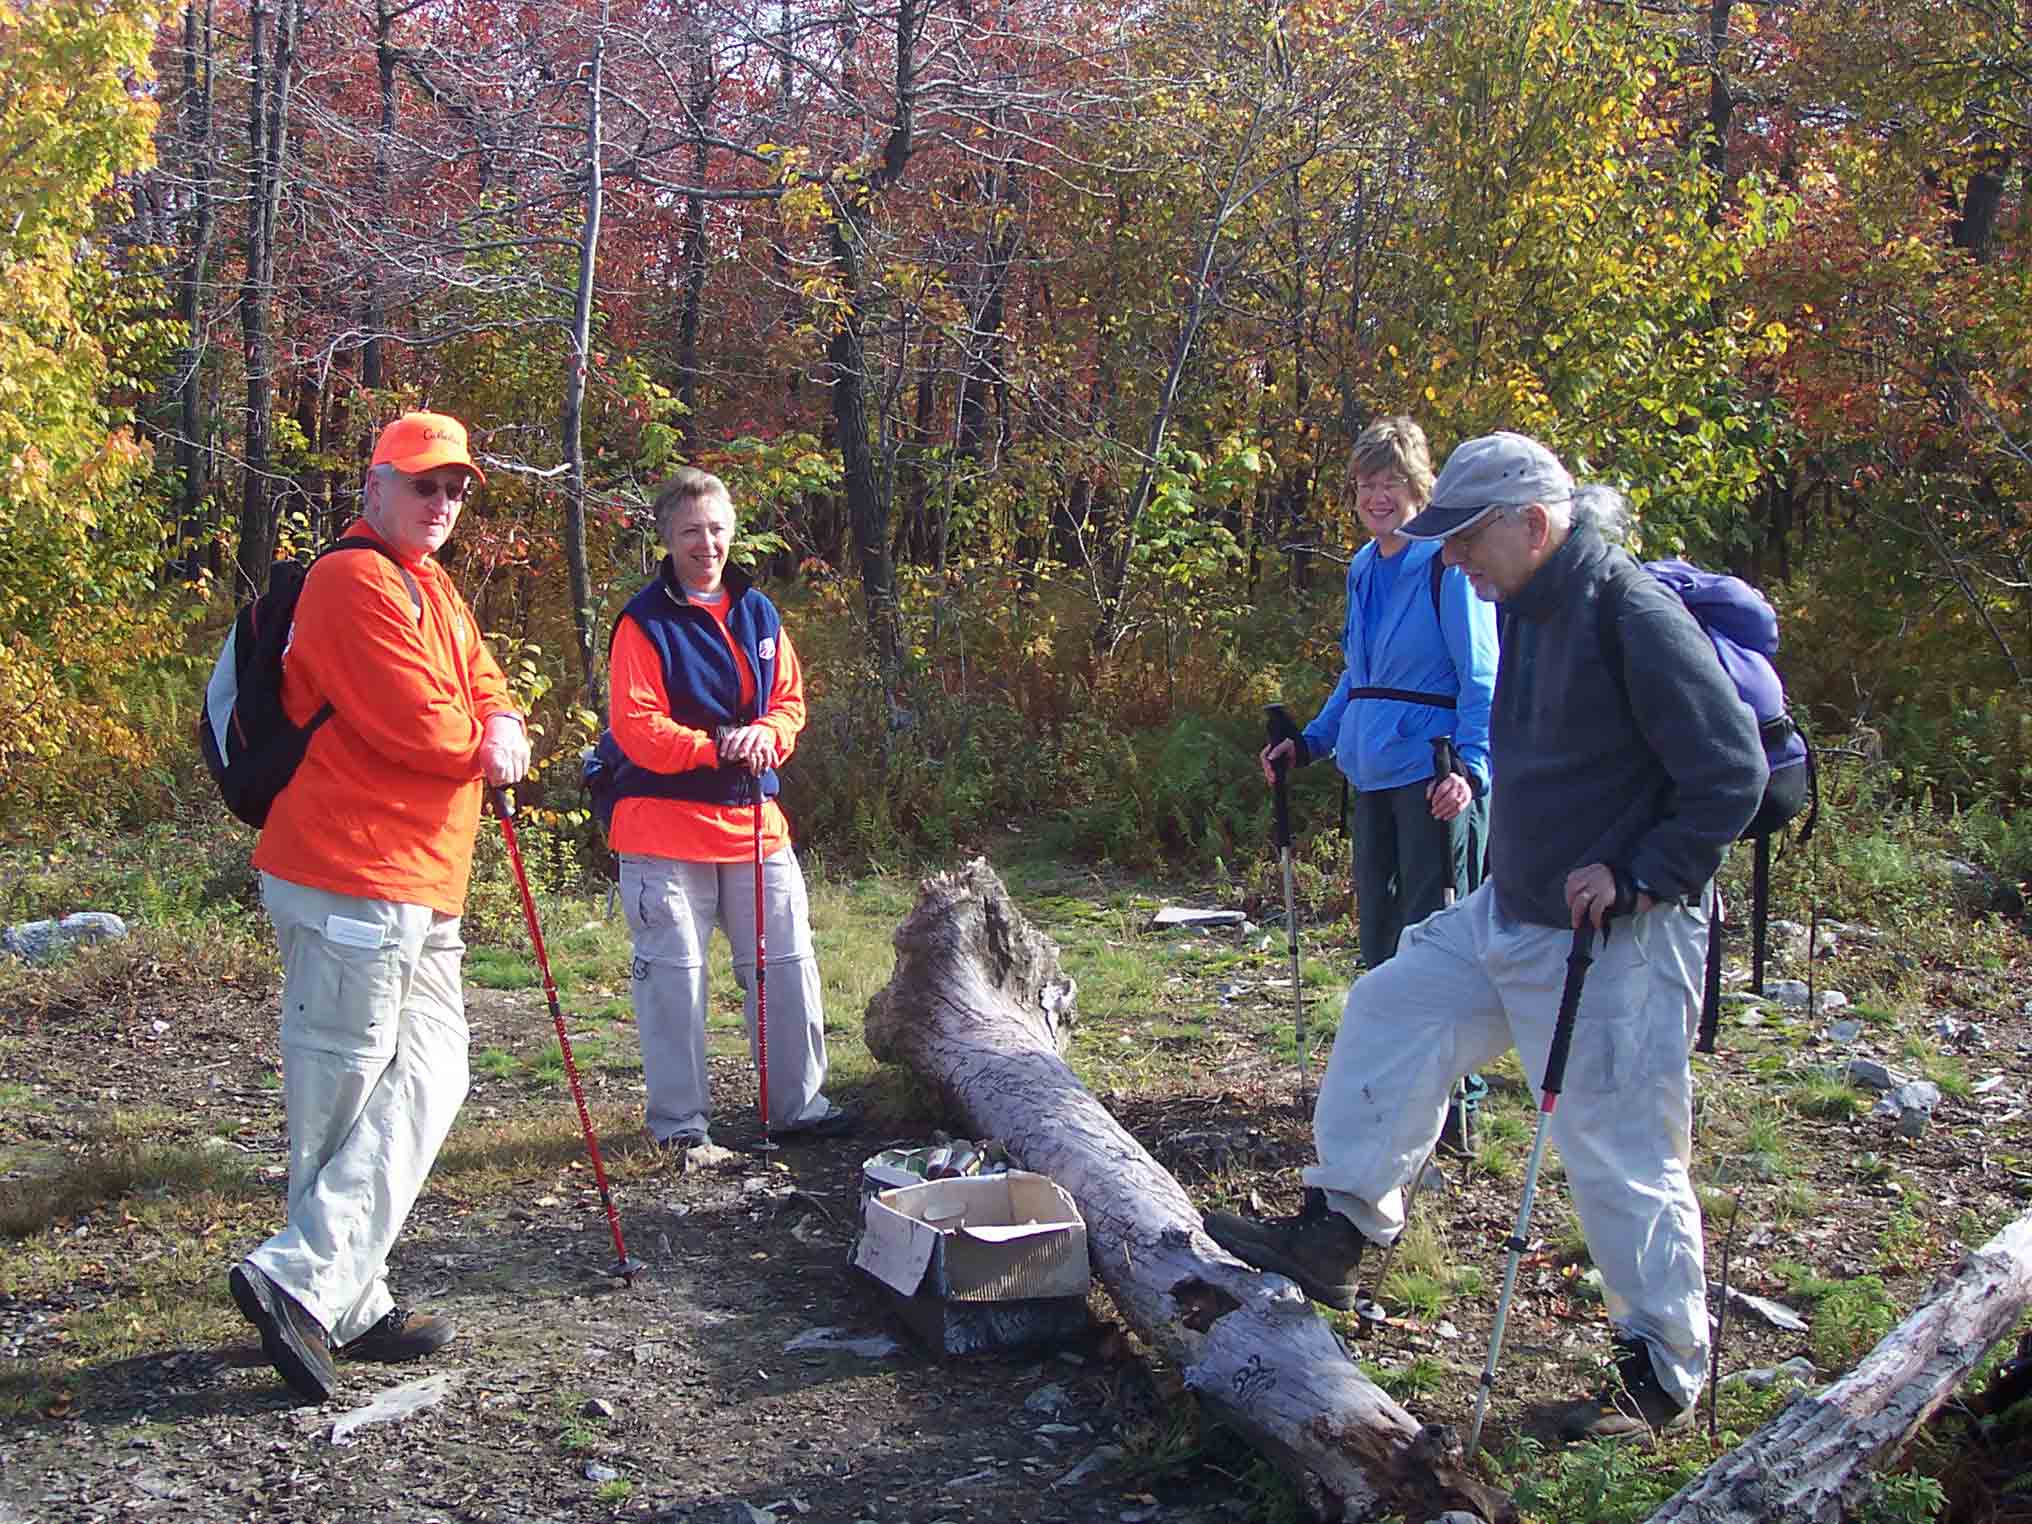 L to R: David and Cyndi, Marsha and Barry at campsite near viewpoint about a quarter mile east (trail north) of powerlines. This is approx. MM 16.4.  Courtesy dlcul@conncoll.edu